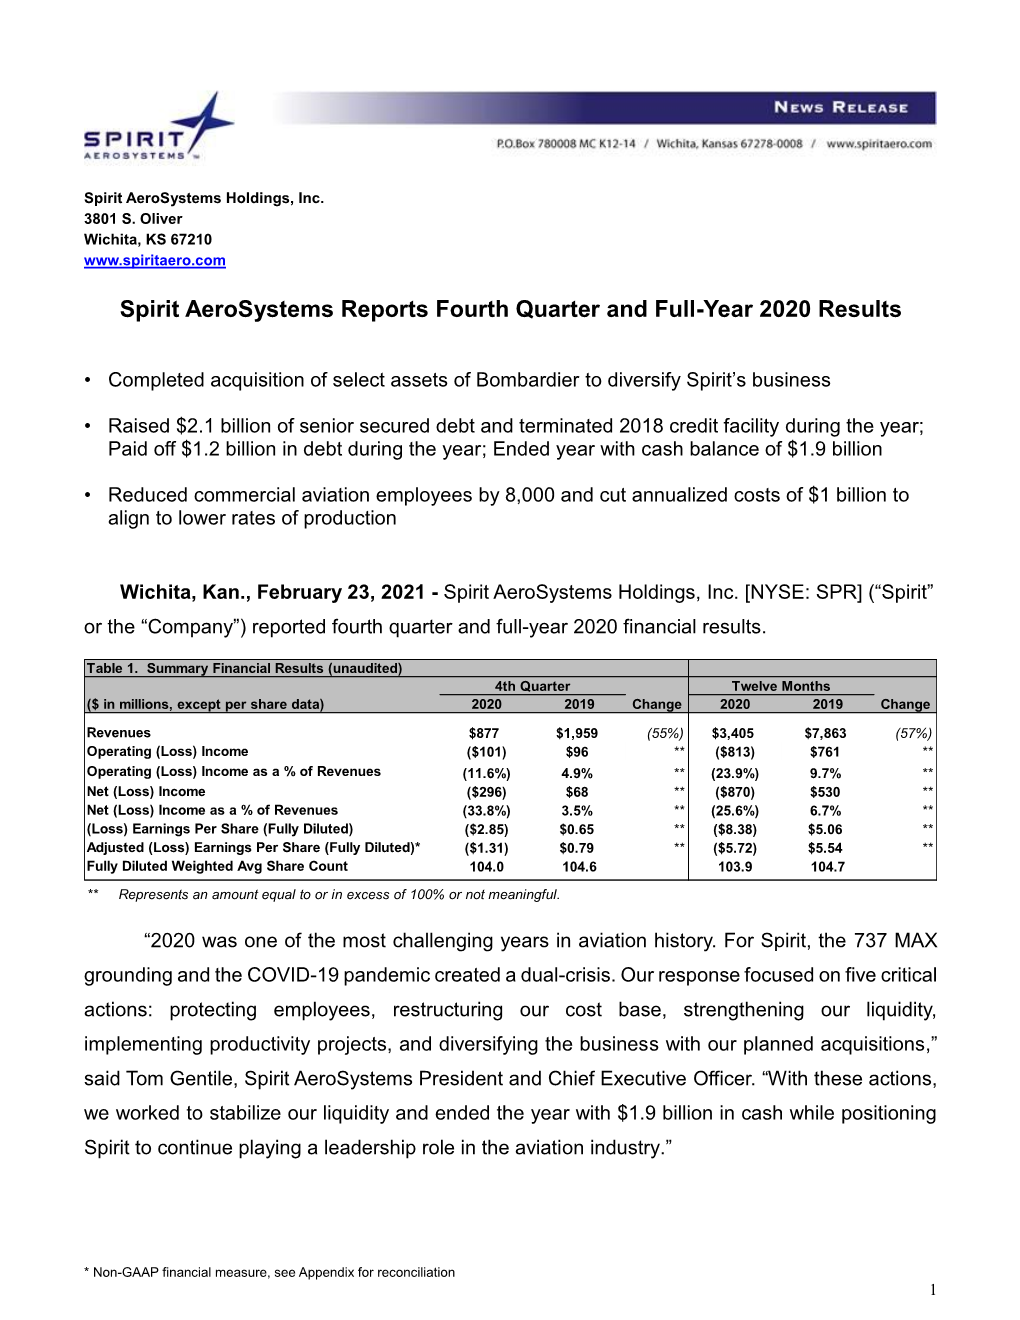 Spirit Aerosystems Reports Fourth Quarter and Full-Year 2020 Results